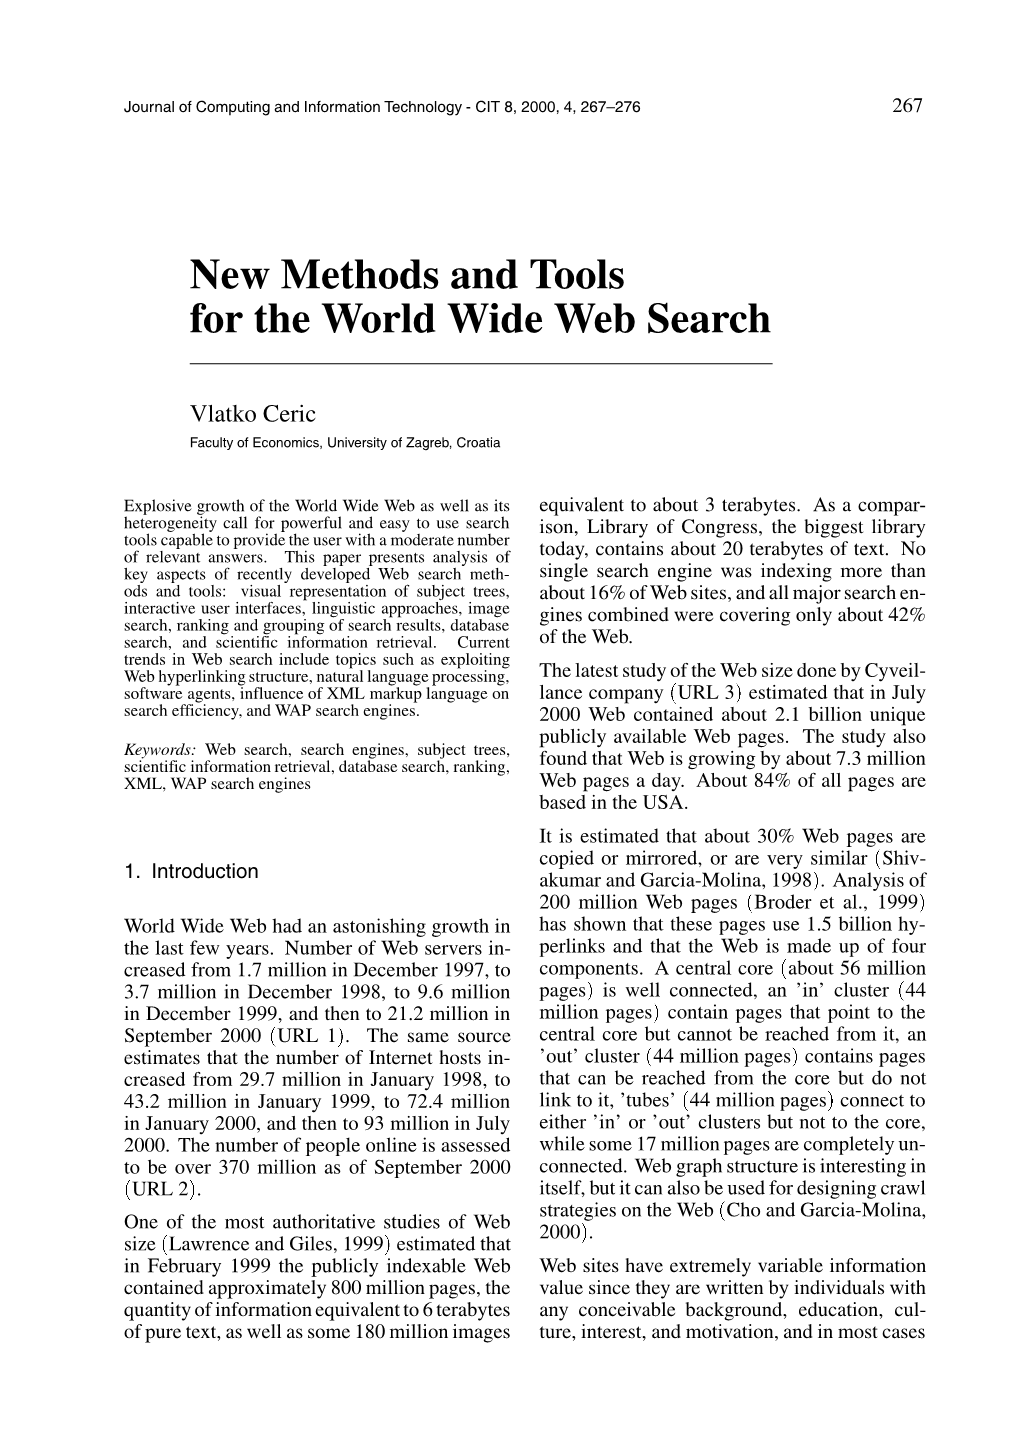 New Methods and Tools for the World Wide Web Search